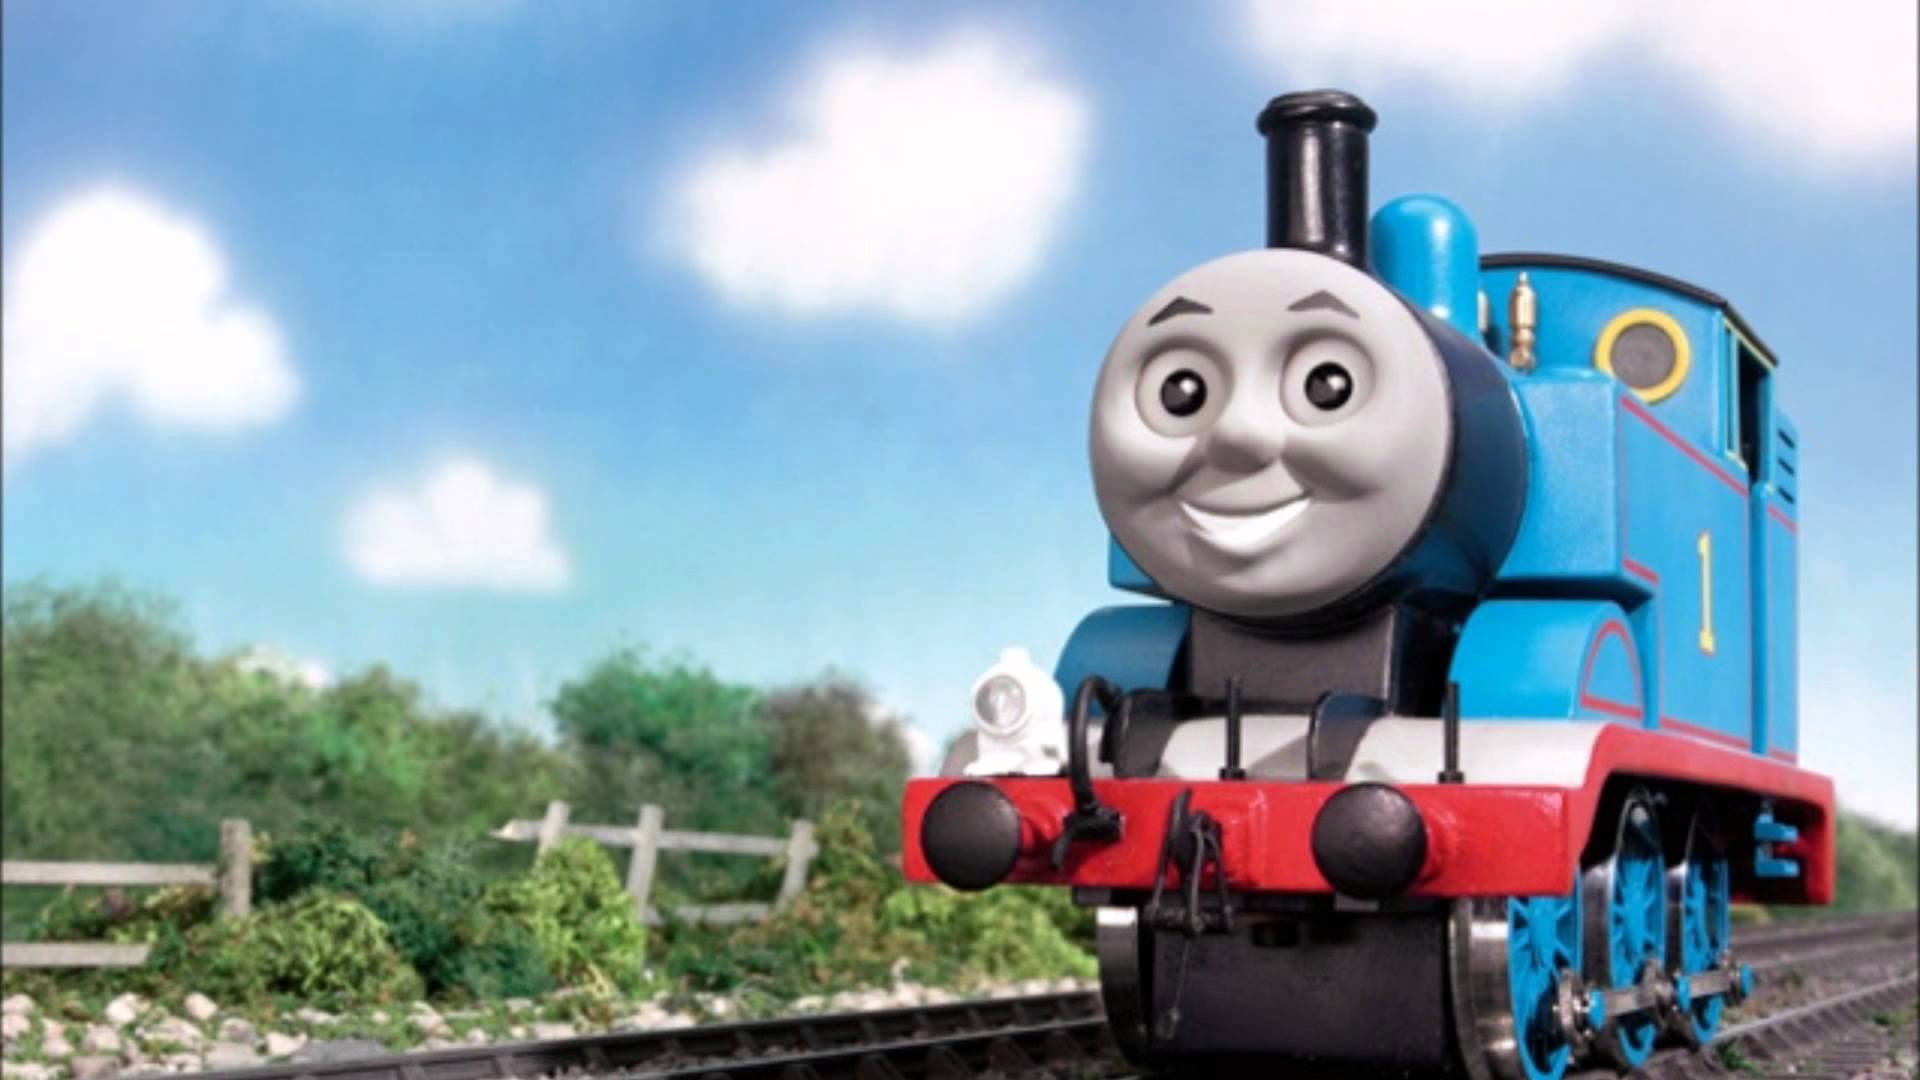 Dan Harmon to develop "Thomas the Tank Engine for adults"